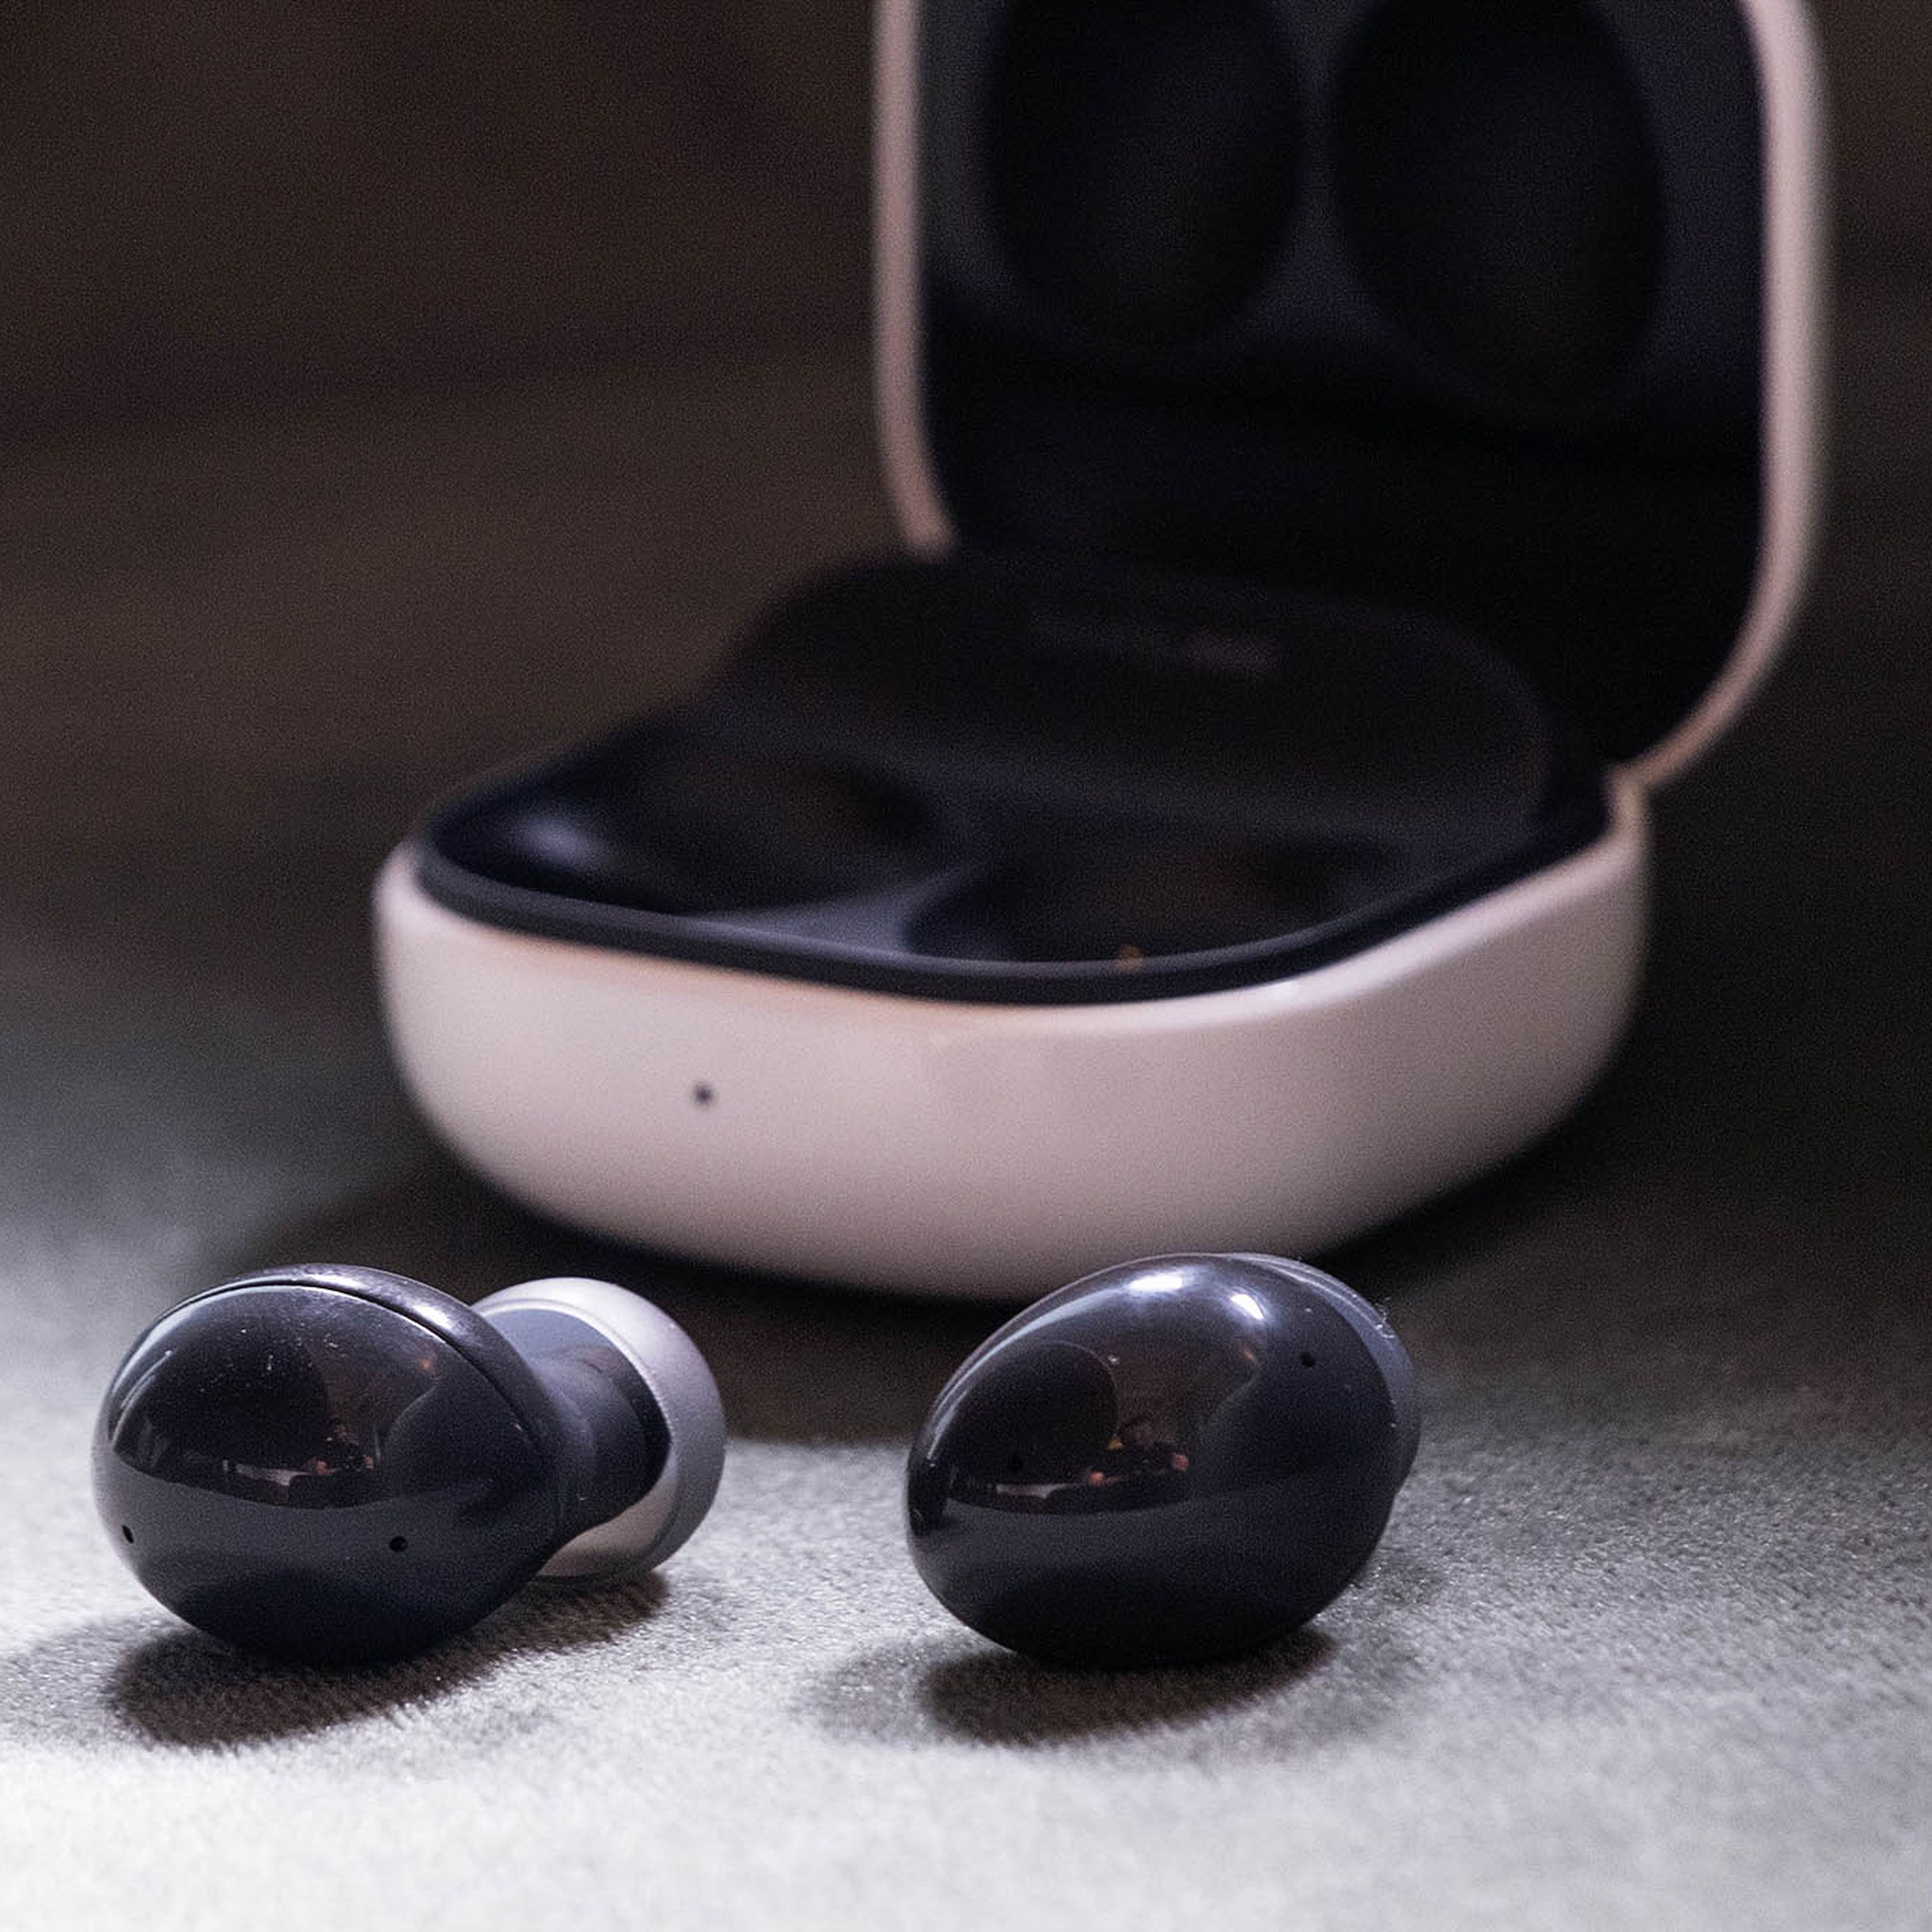 The Samsung Galaxy Buds 2 sitting outside their case.